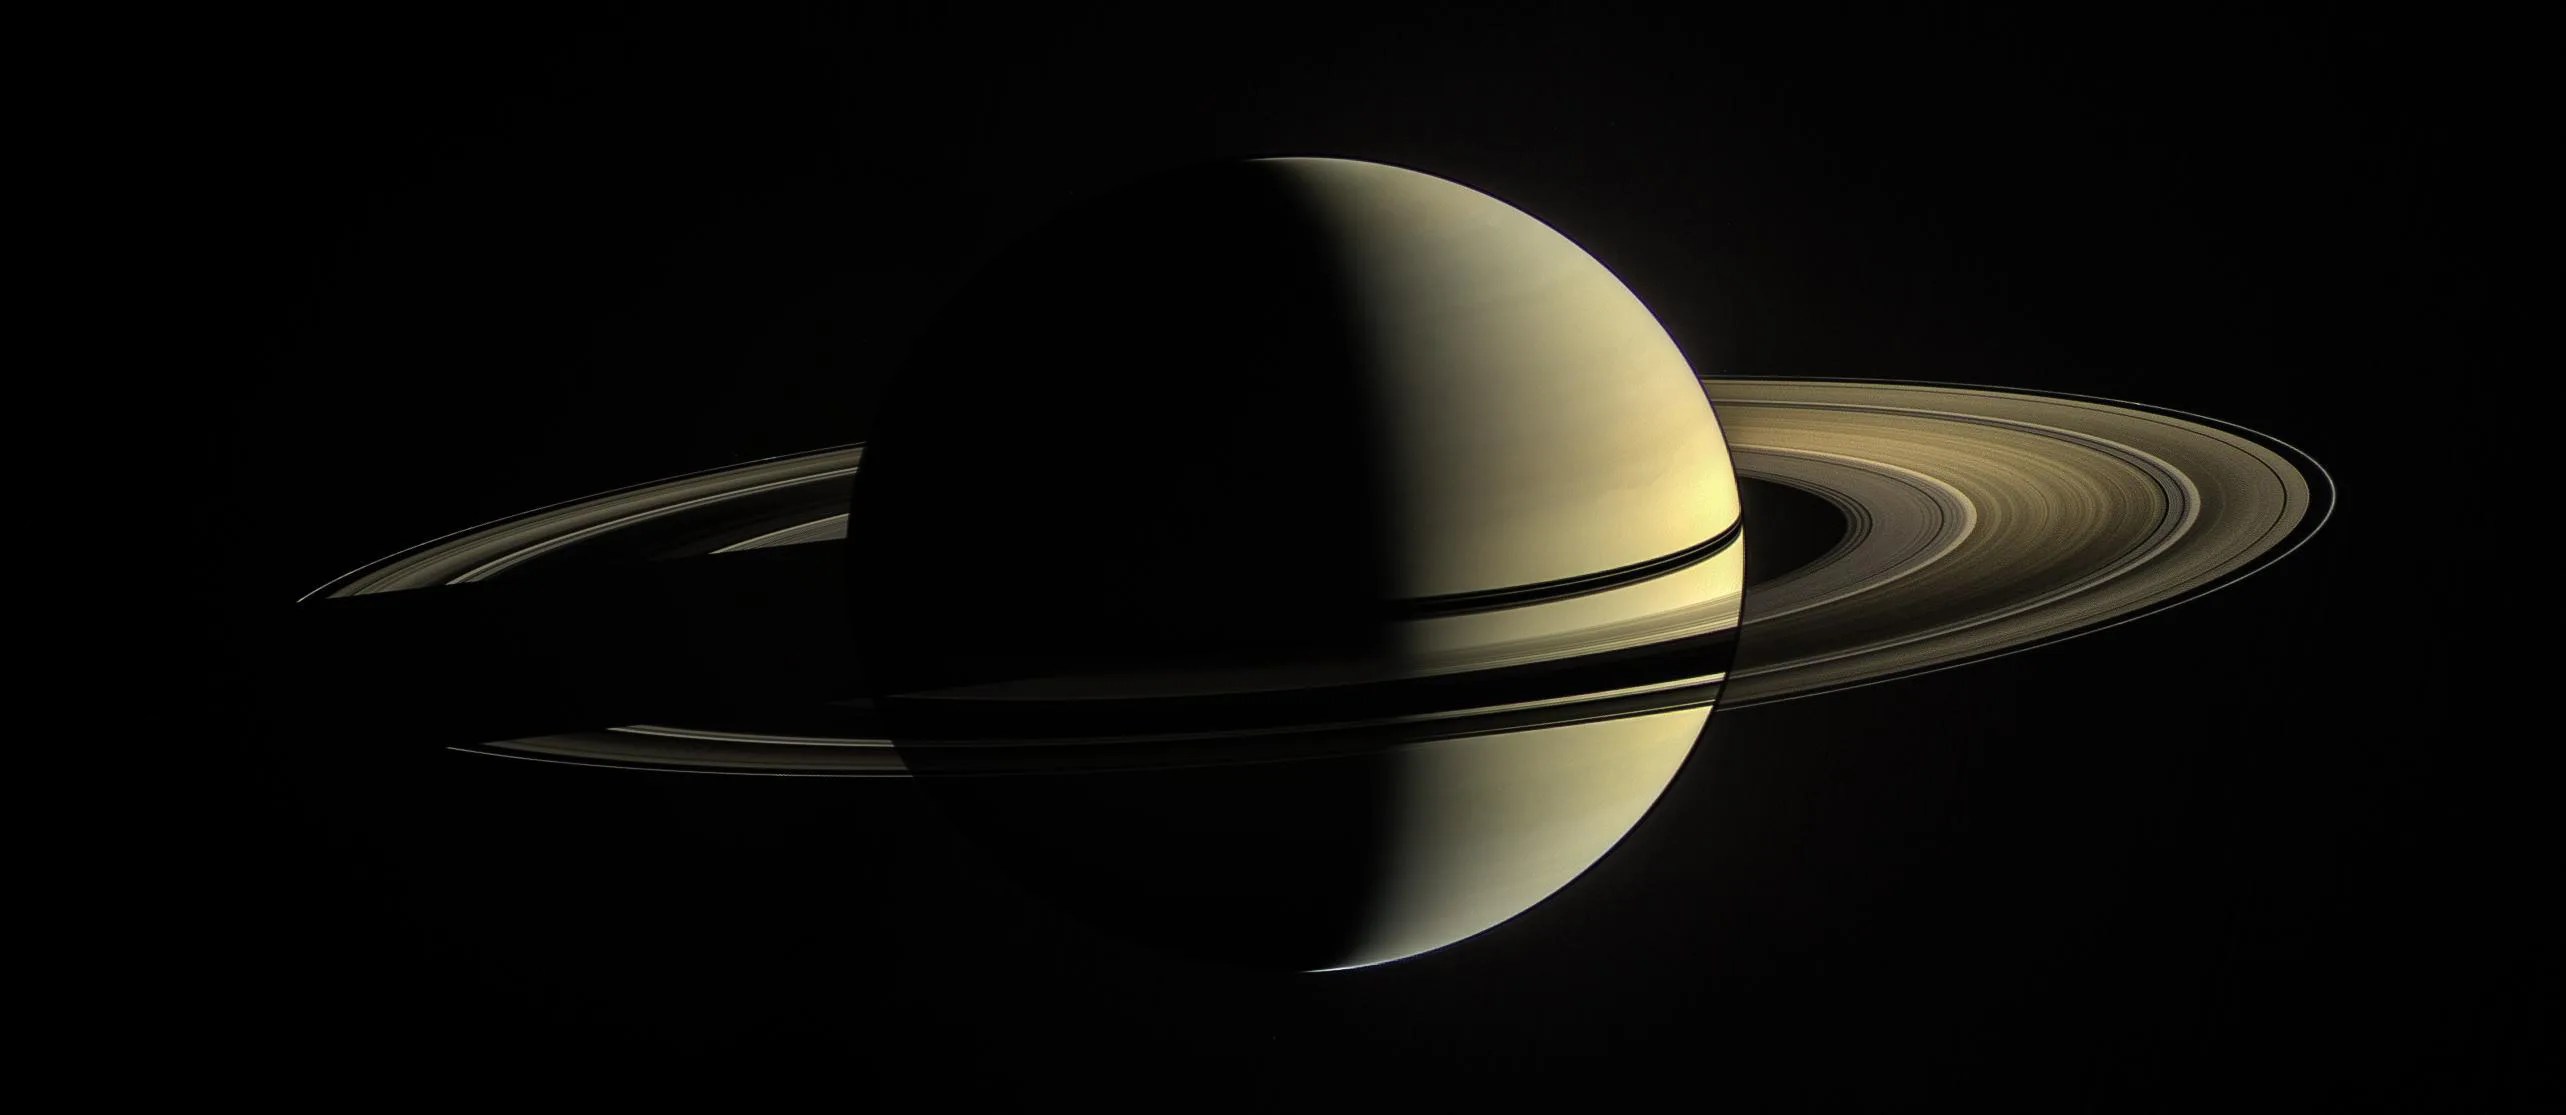 Full view of Saturn partially illuminated by the Sun.